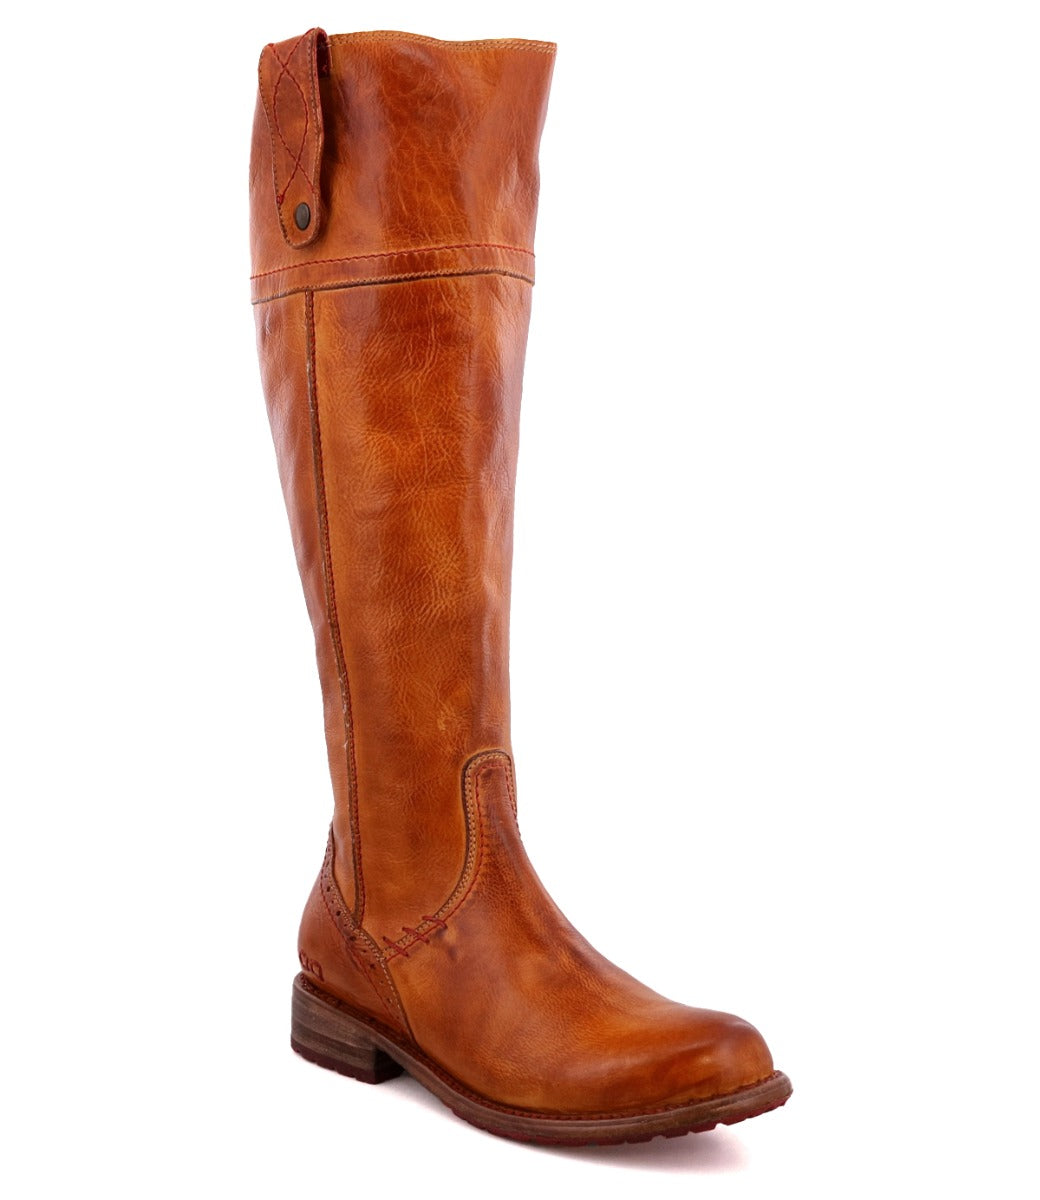 A women's Jacqueline Wide Calf riding boot by Bed Stu in tan leather.